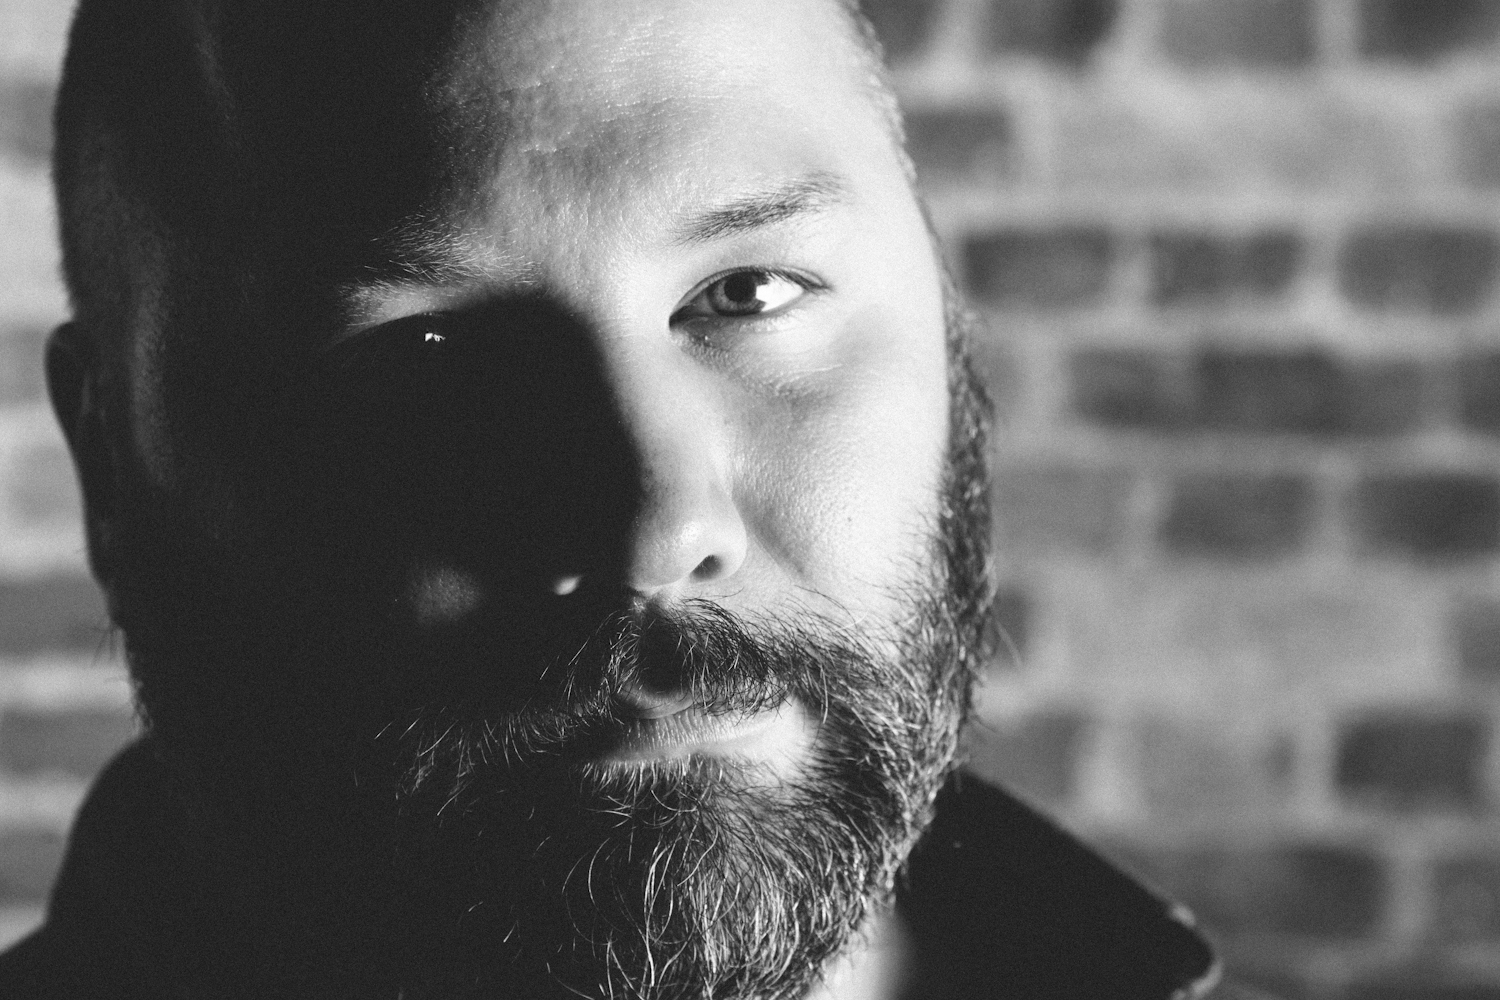 Catching up with Prosumer